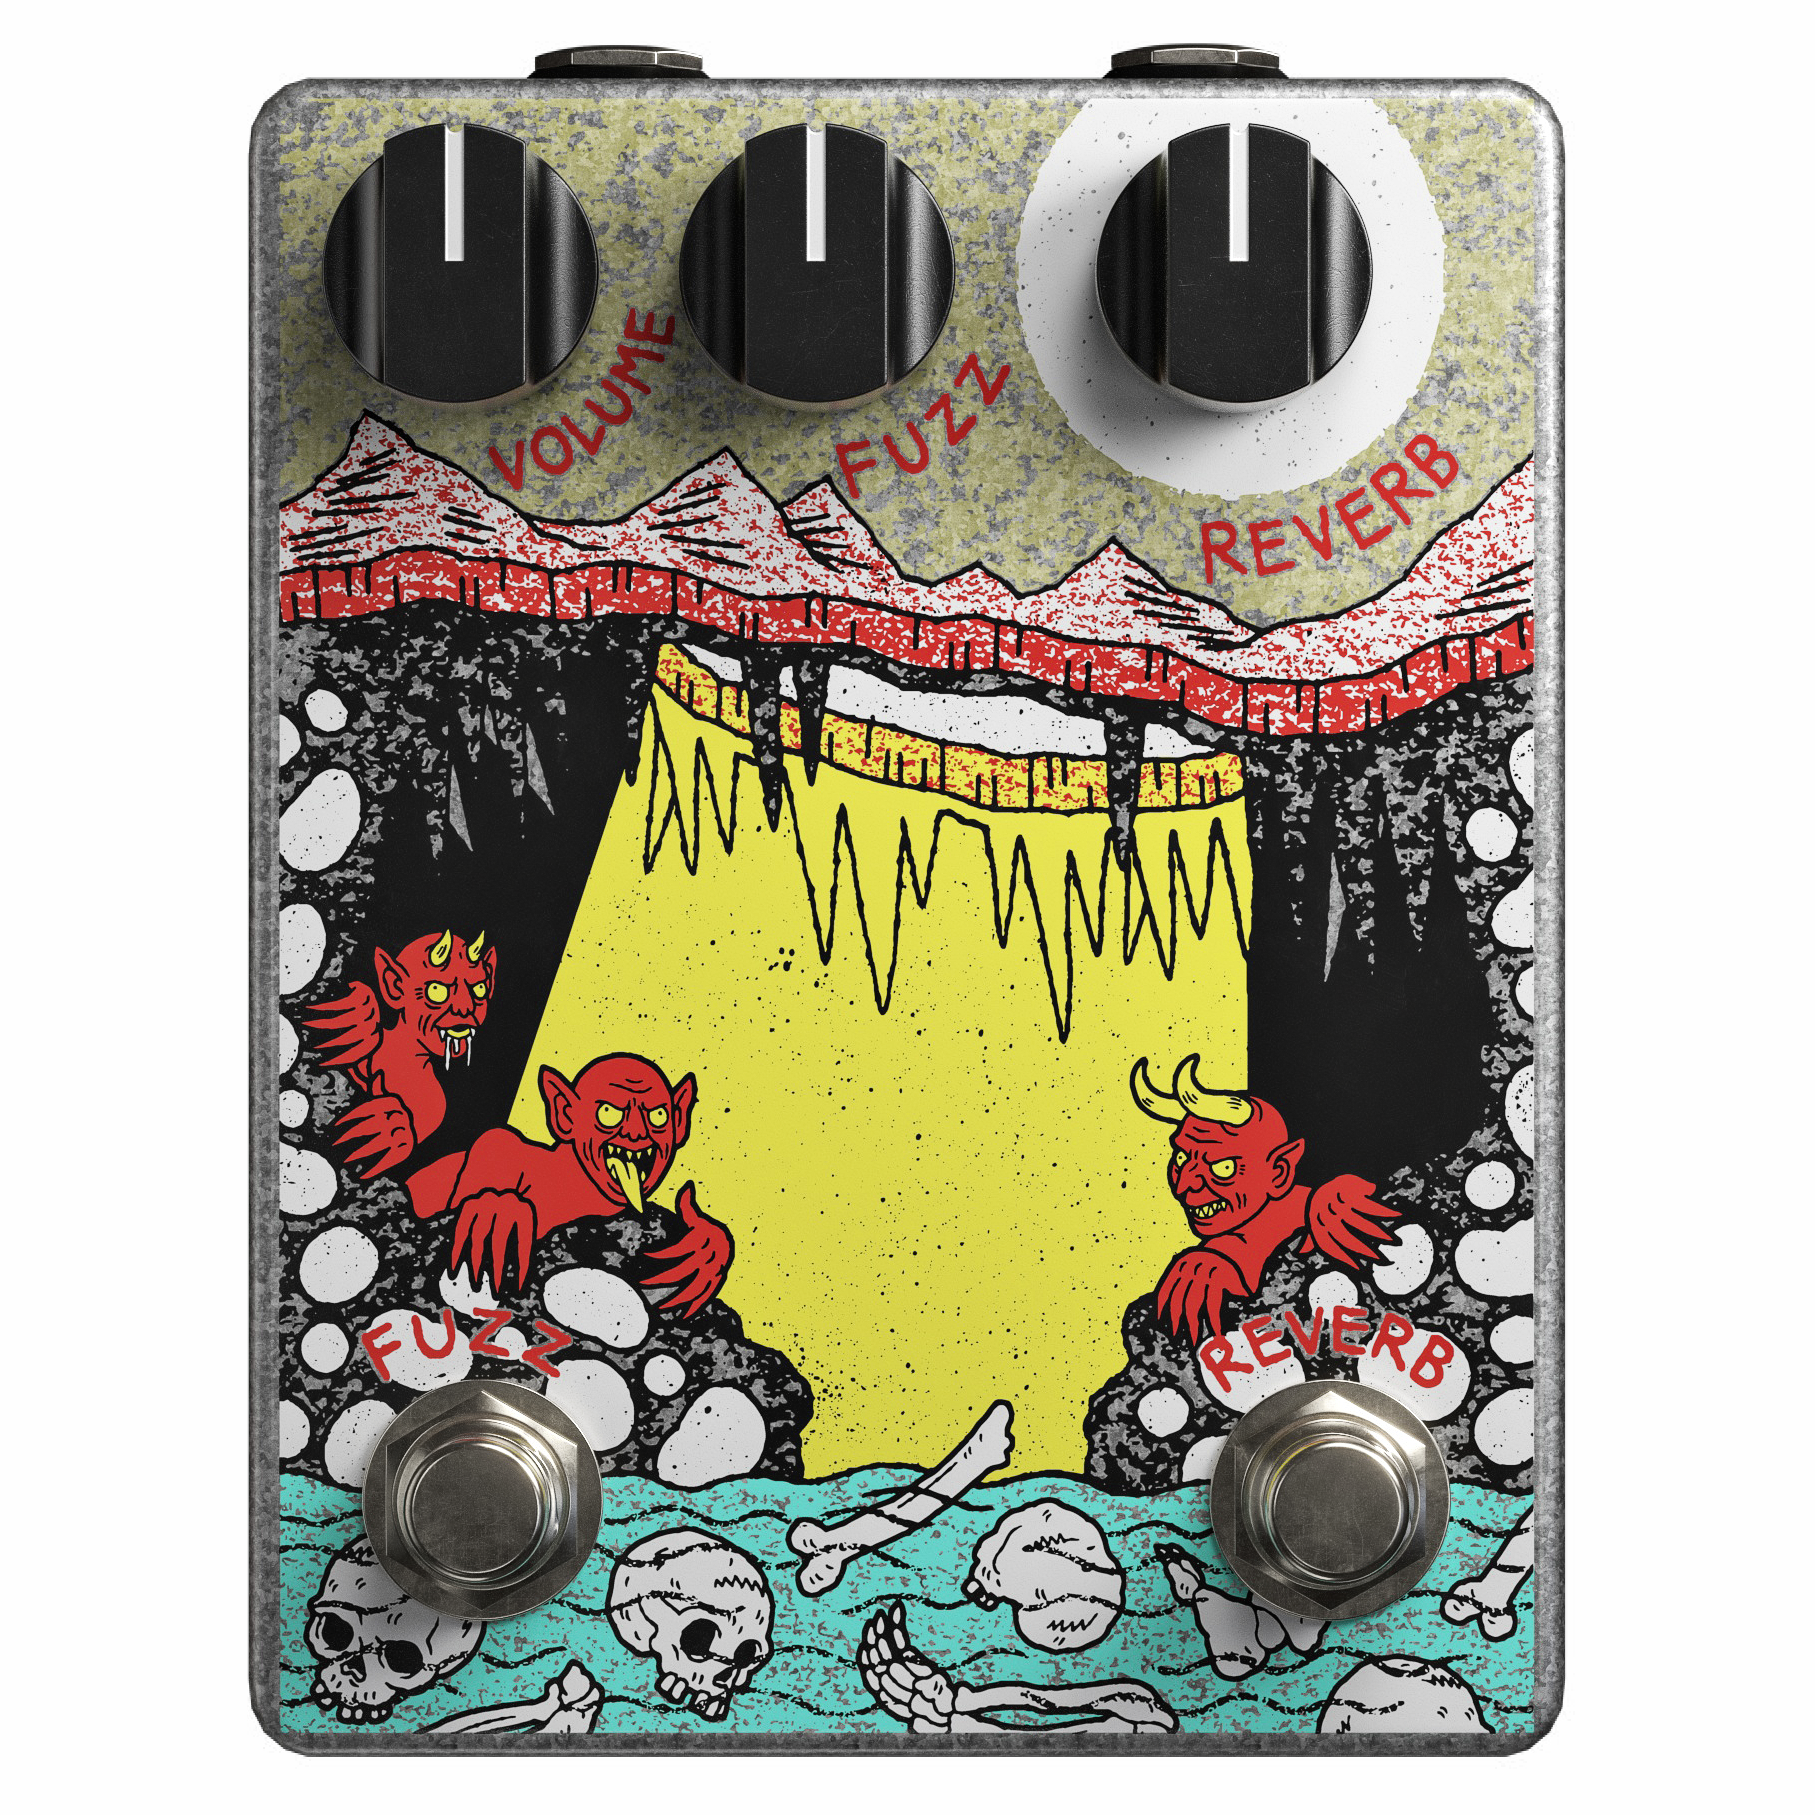 Cenote Throwback Art - Limited Edition Fuzz Reverb